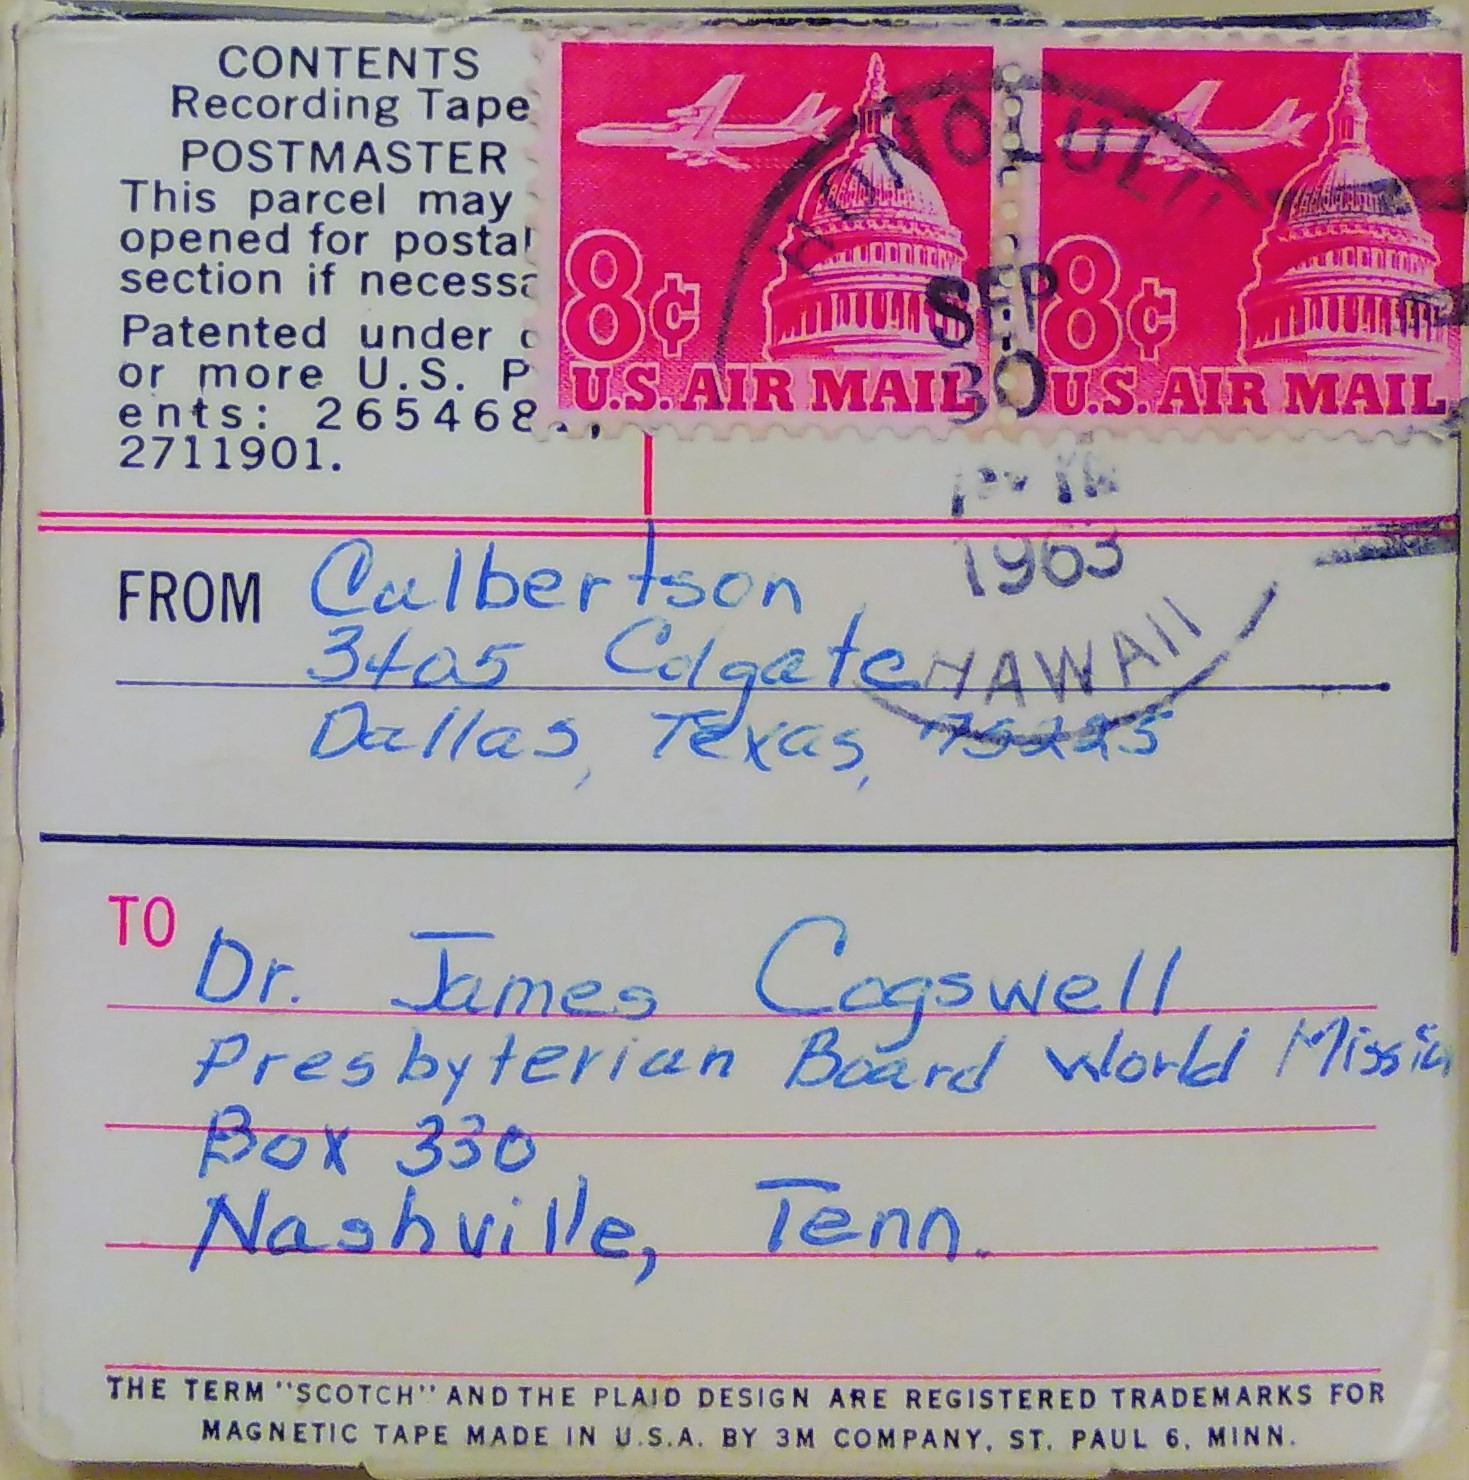 Culbertson audio letter to Cogswell, 1963, tape two, side one.